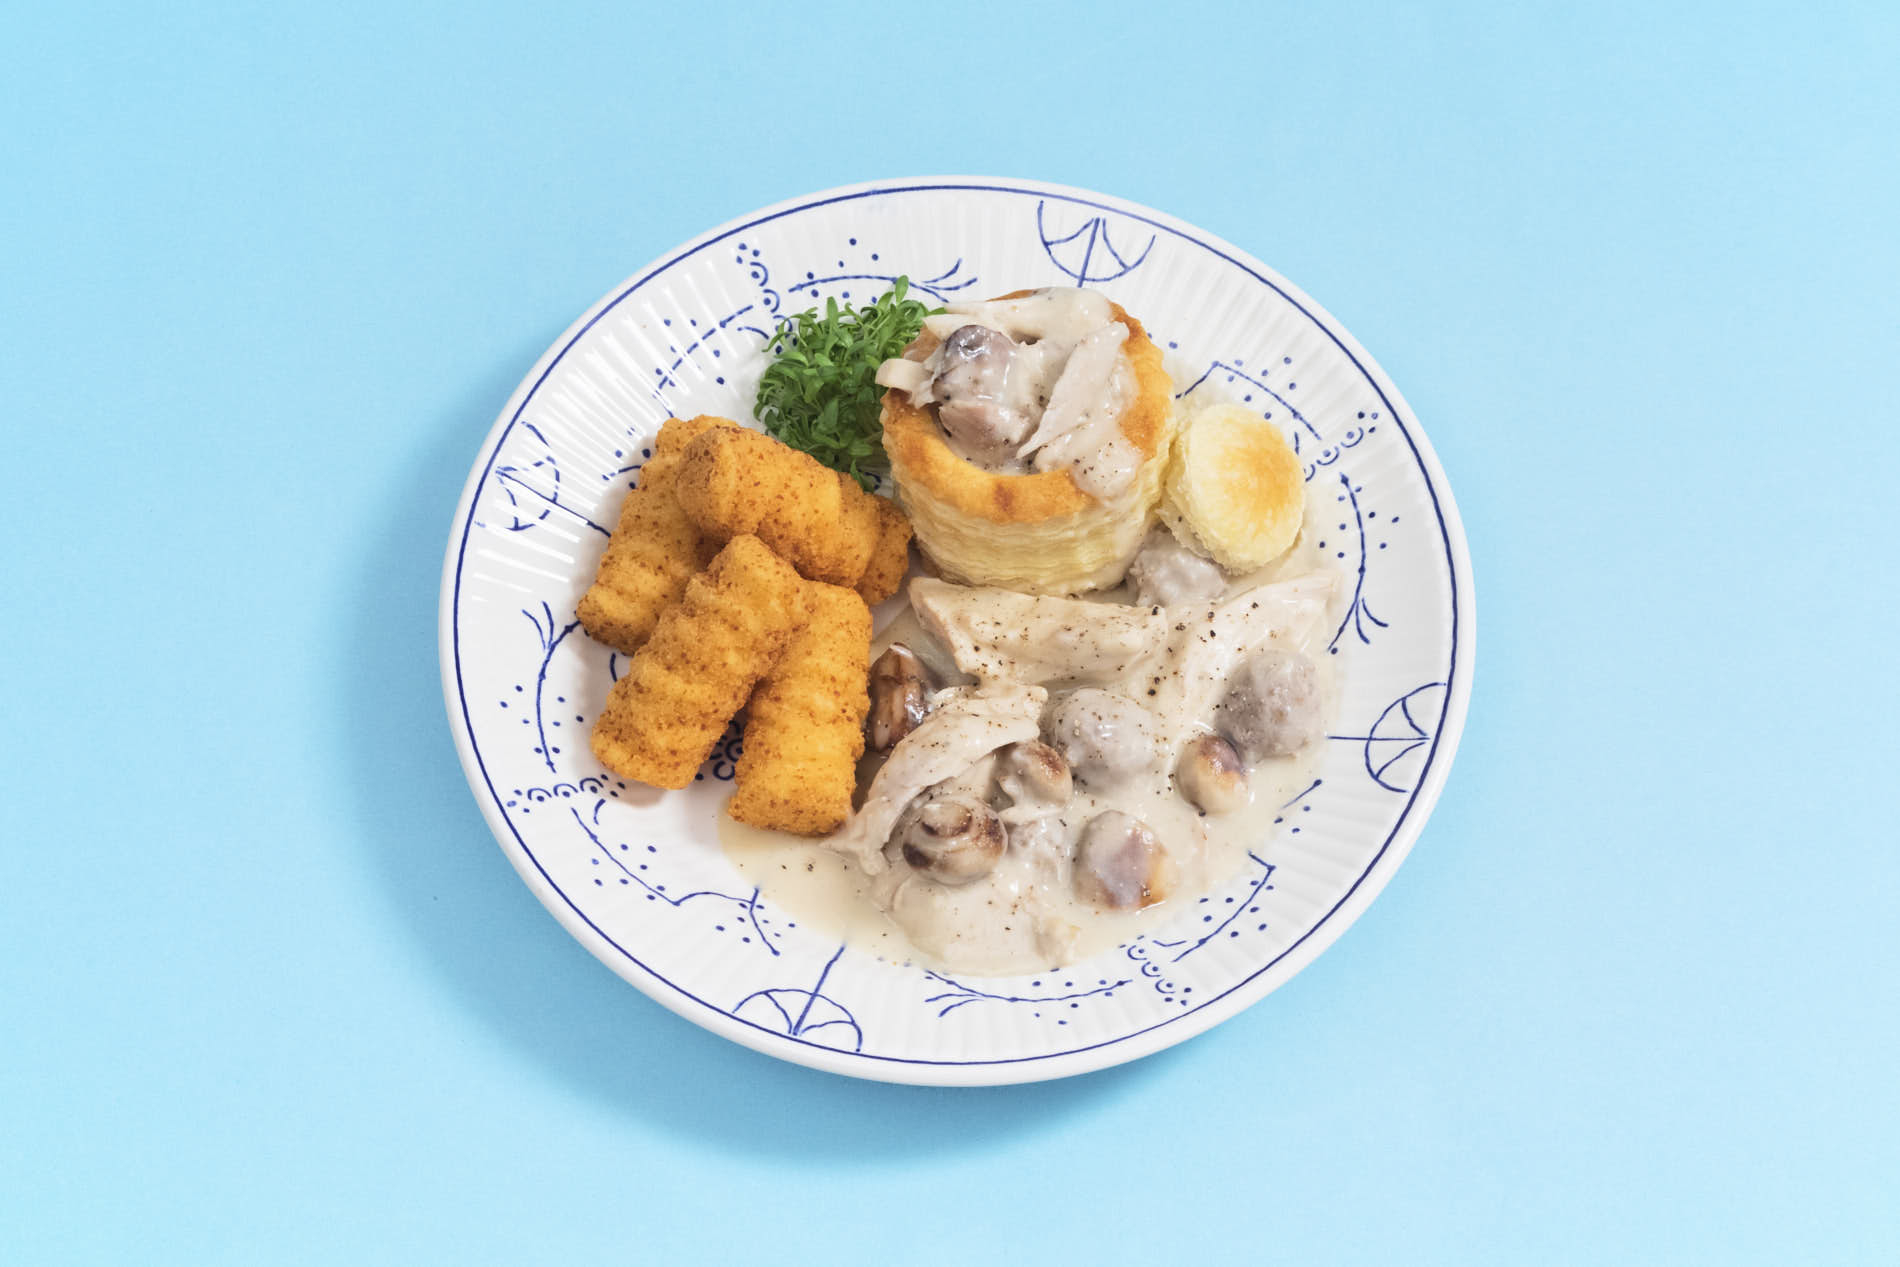 oldschool style plate with vol-au-vent and croquettes